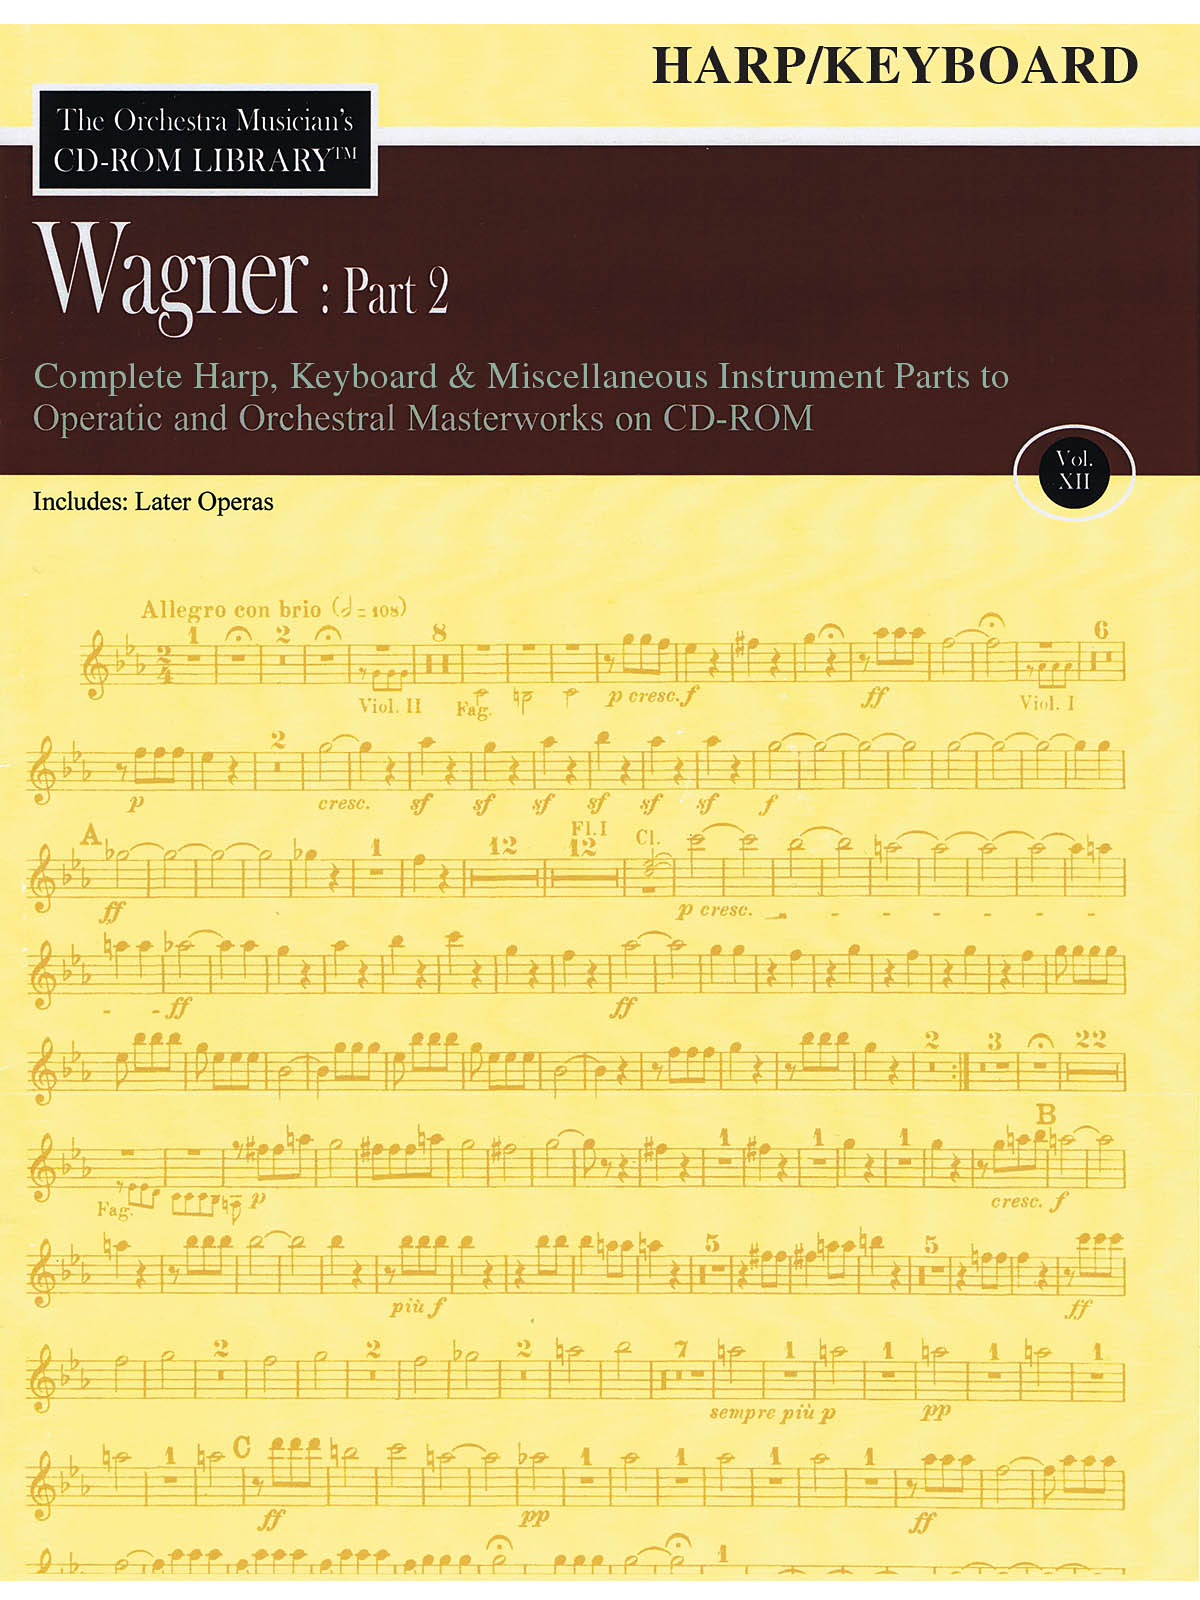 Wagner: Part 2 - Volume 12(The Orchestra Musician's CD-ROM Library - Harp, Keyboard & Others)